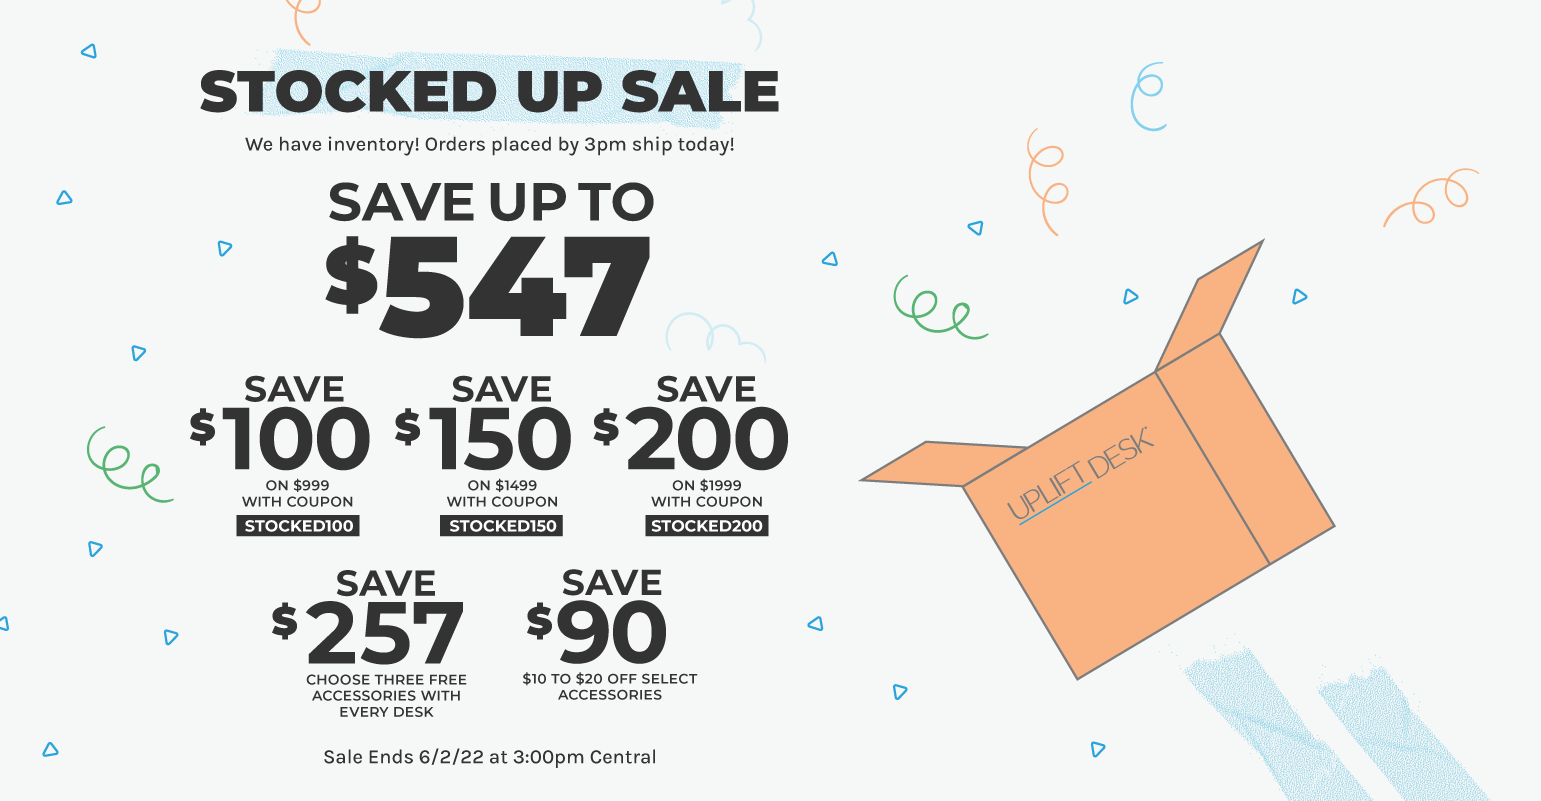 Save up to $547 during the Stocked Up Sale